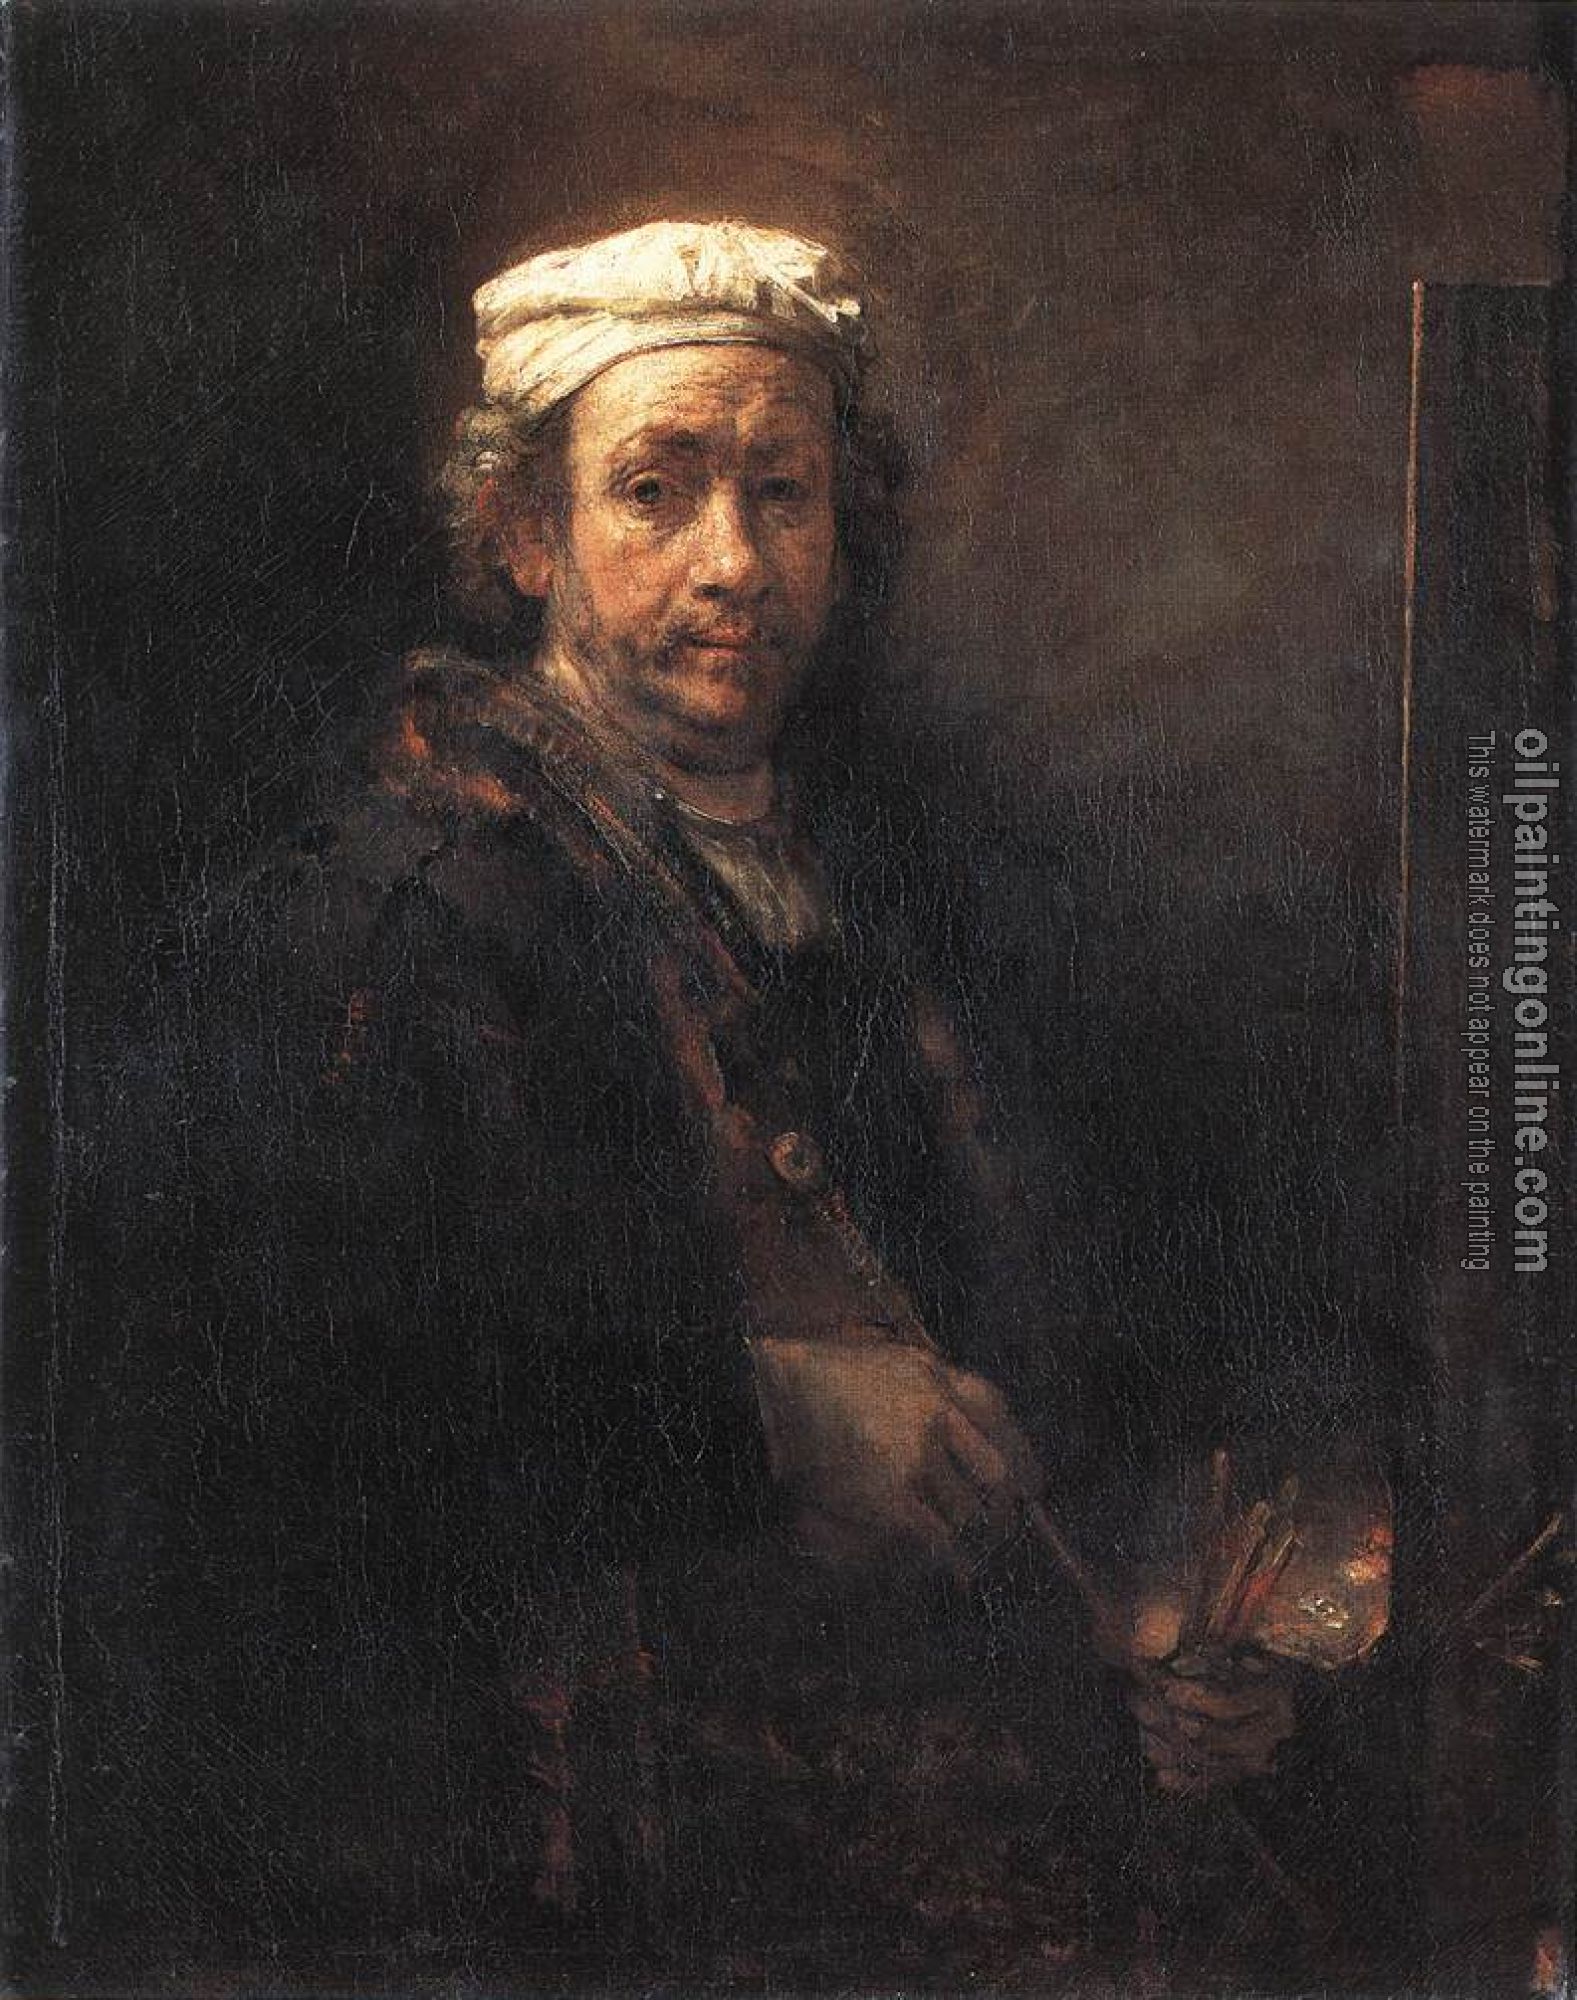 Rembrandt - Portrait of the Artist at His Easel